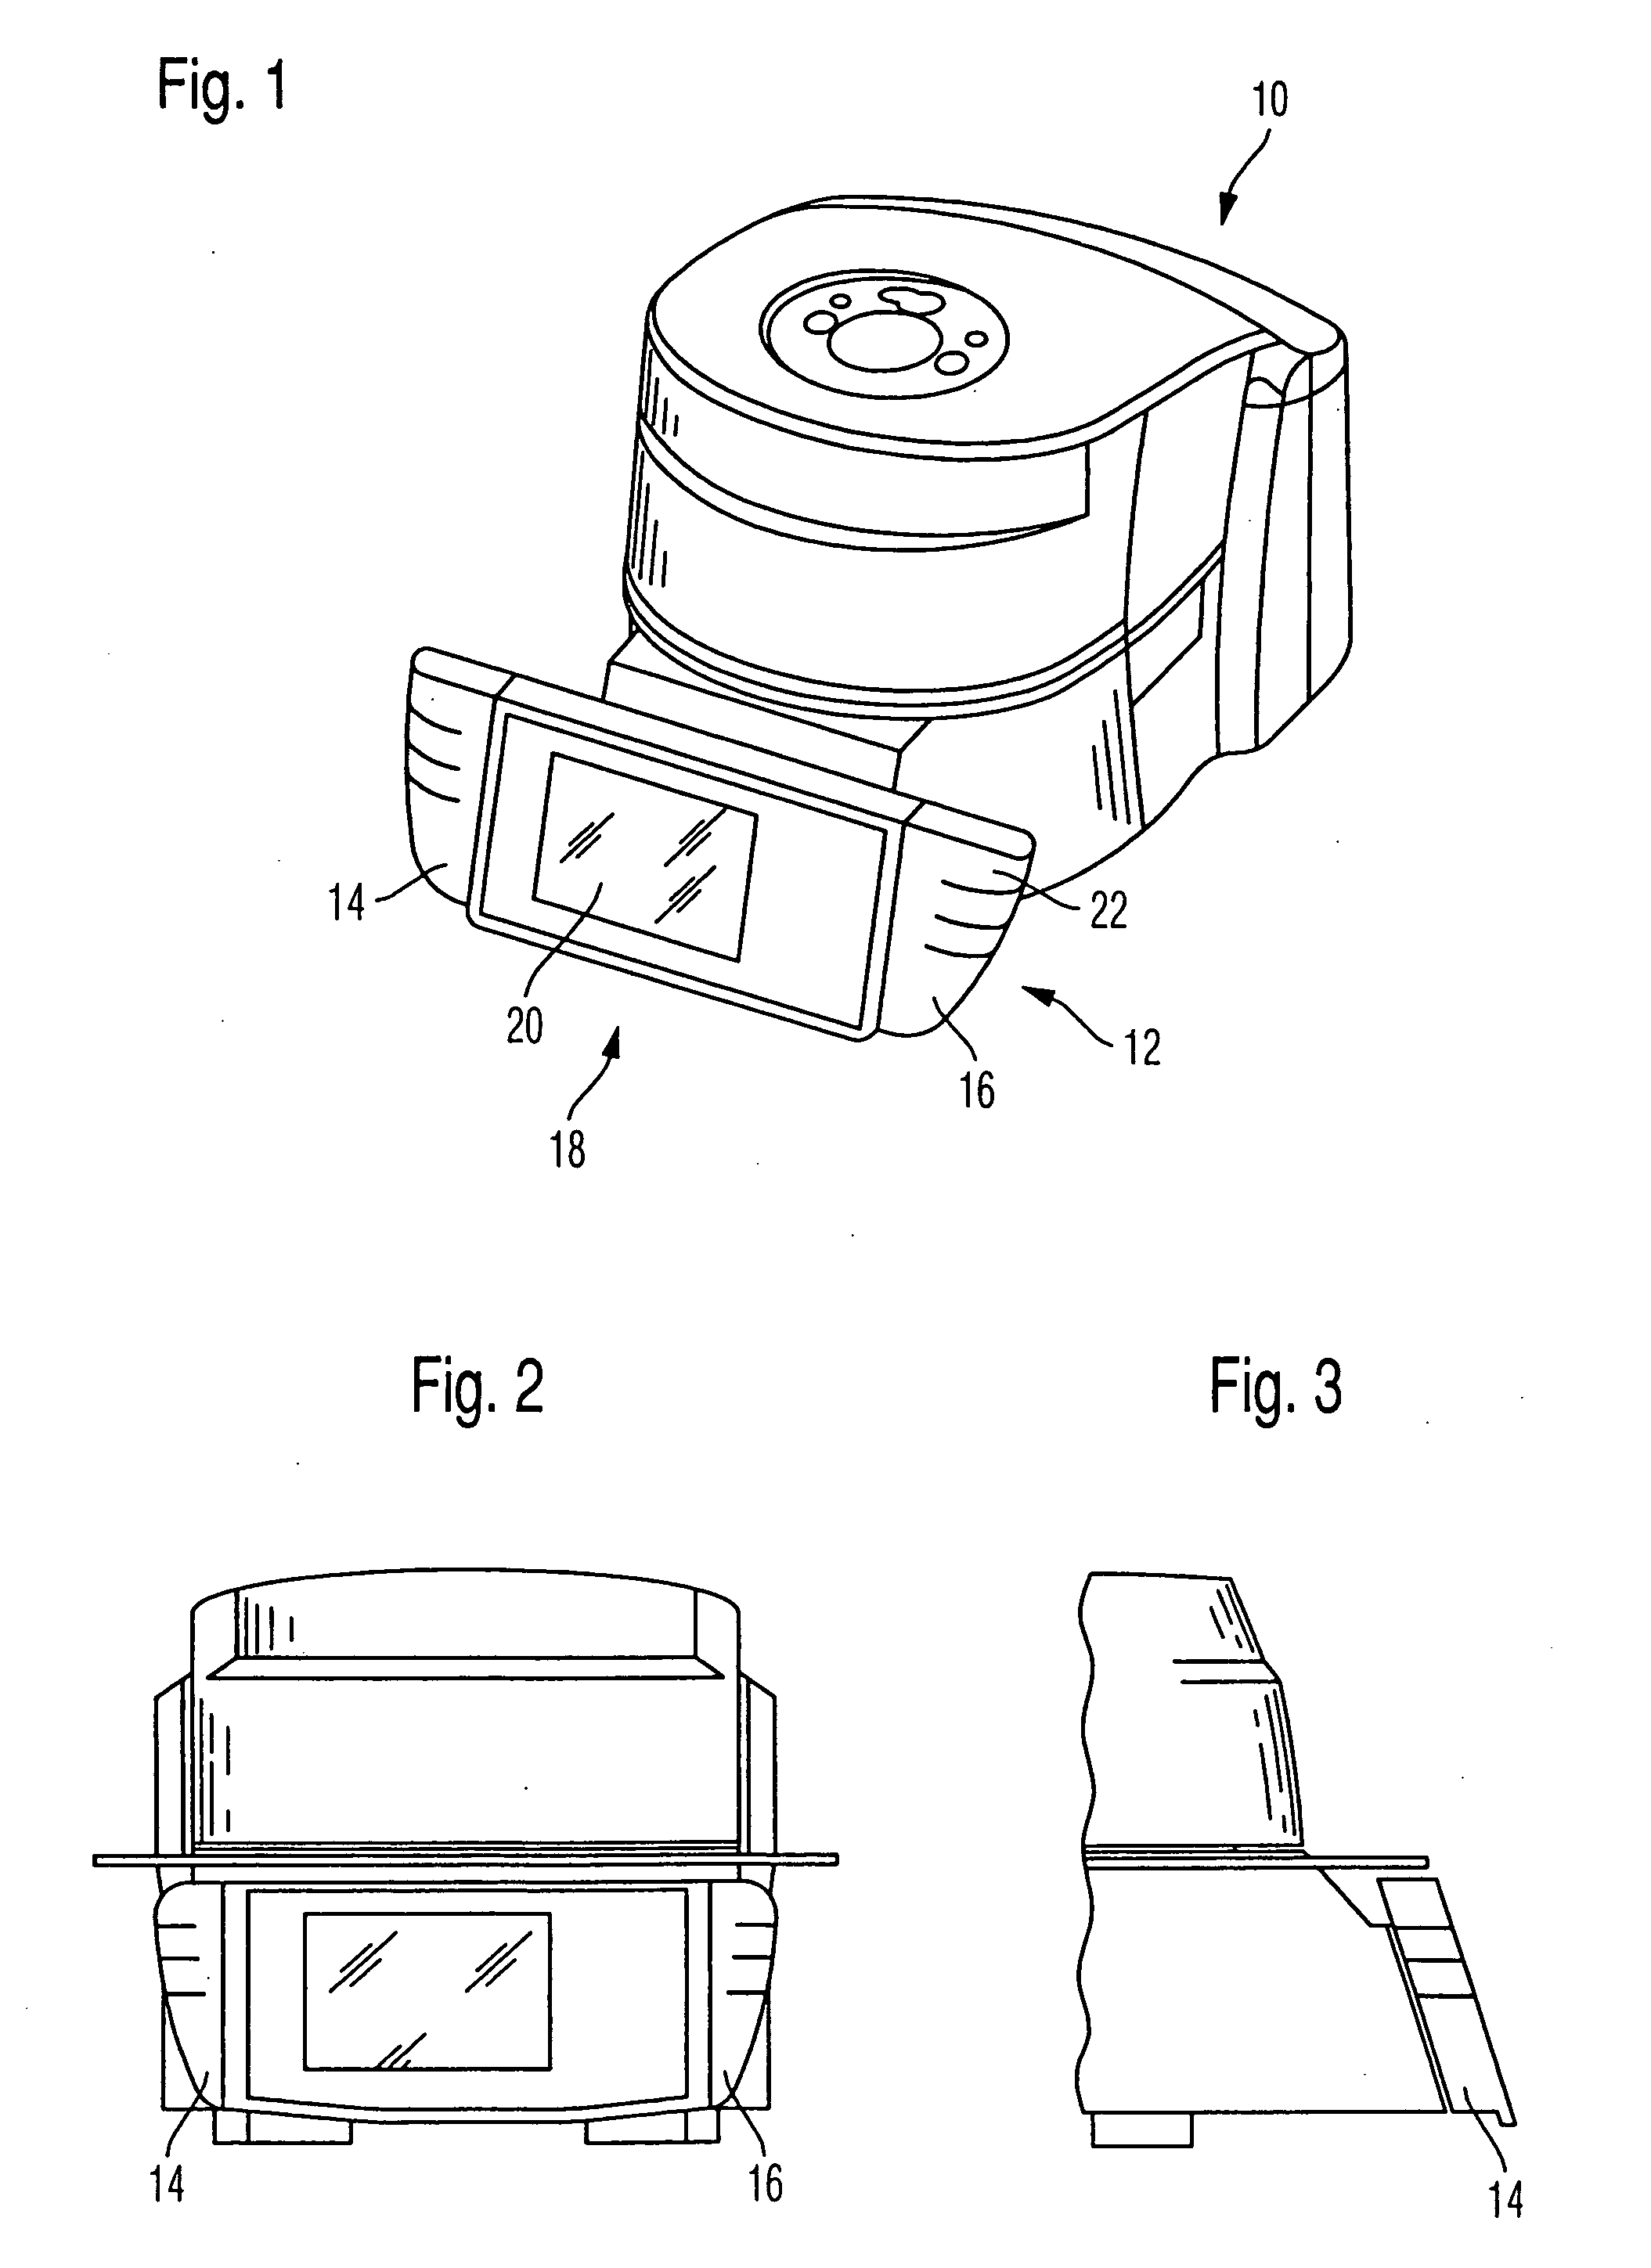 Display associated with a treatment device for dental material